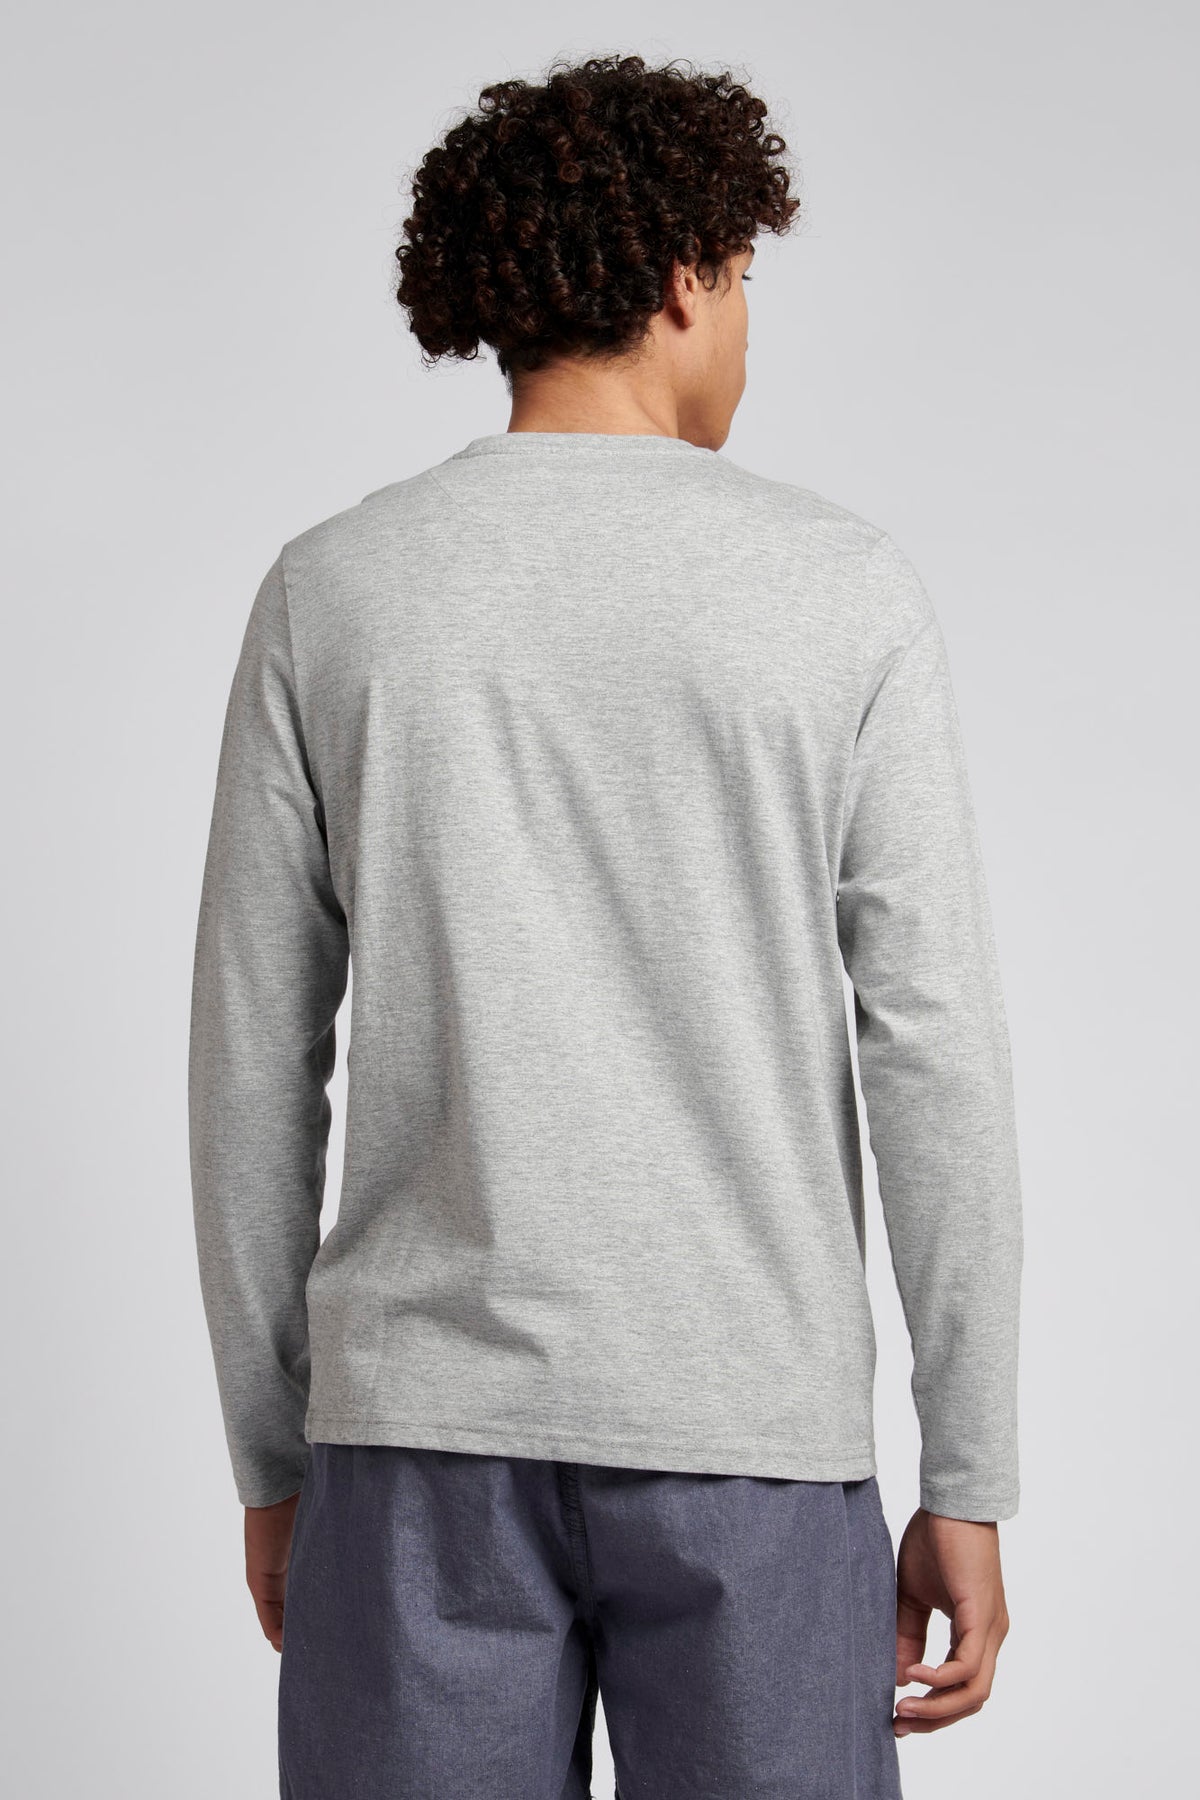 Men Arch Graphic Long Sleeve T-Shirt in Vintage Grey Heather